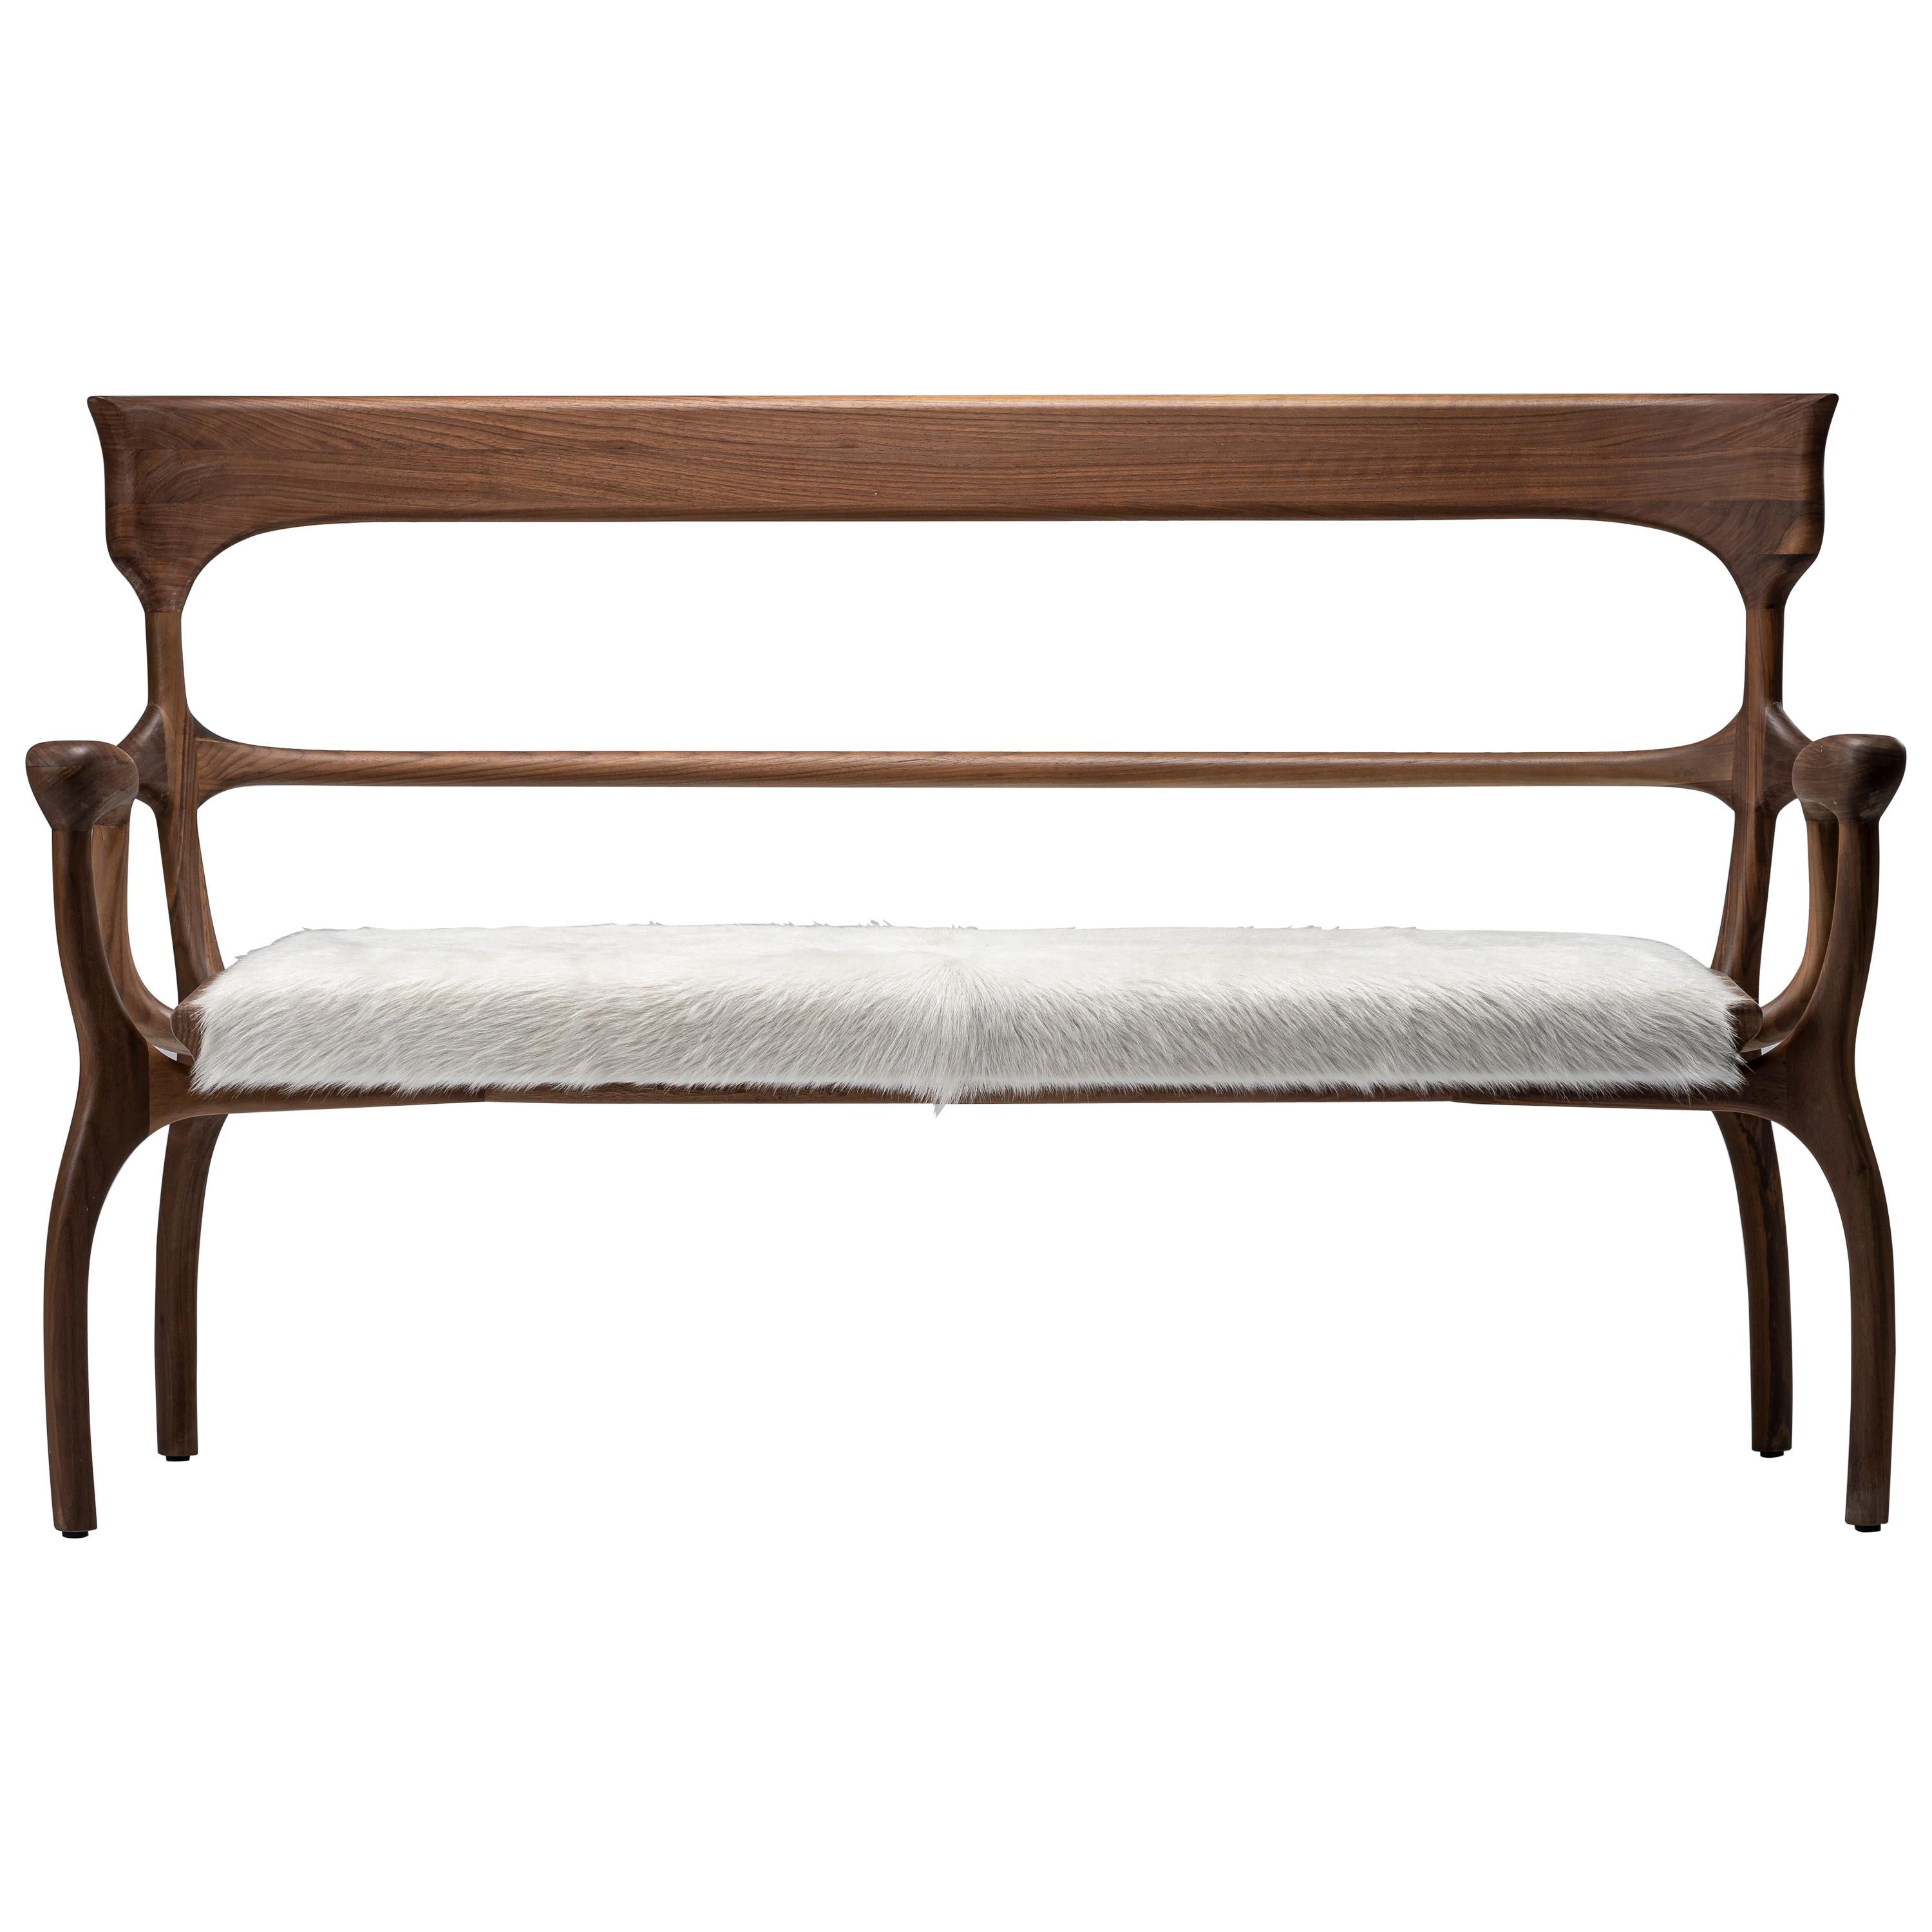 MARTA Walnut Settee/Bench with Cream Leather/Cowhide Seat by Mandy Graham